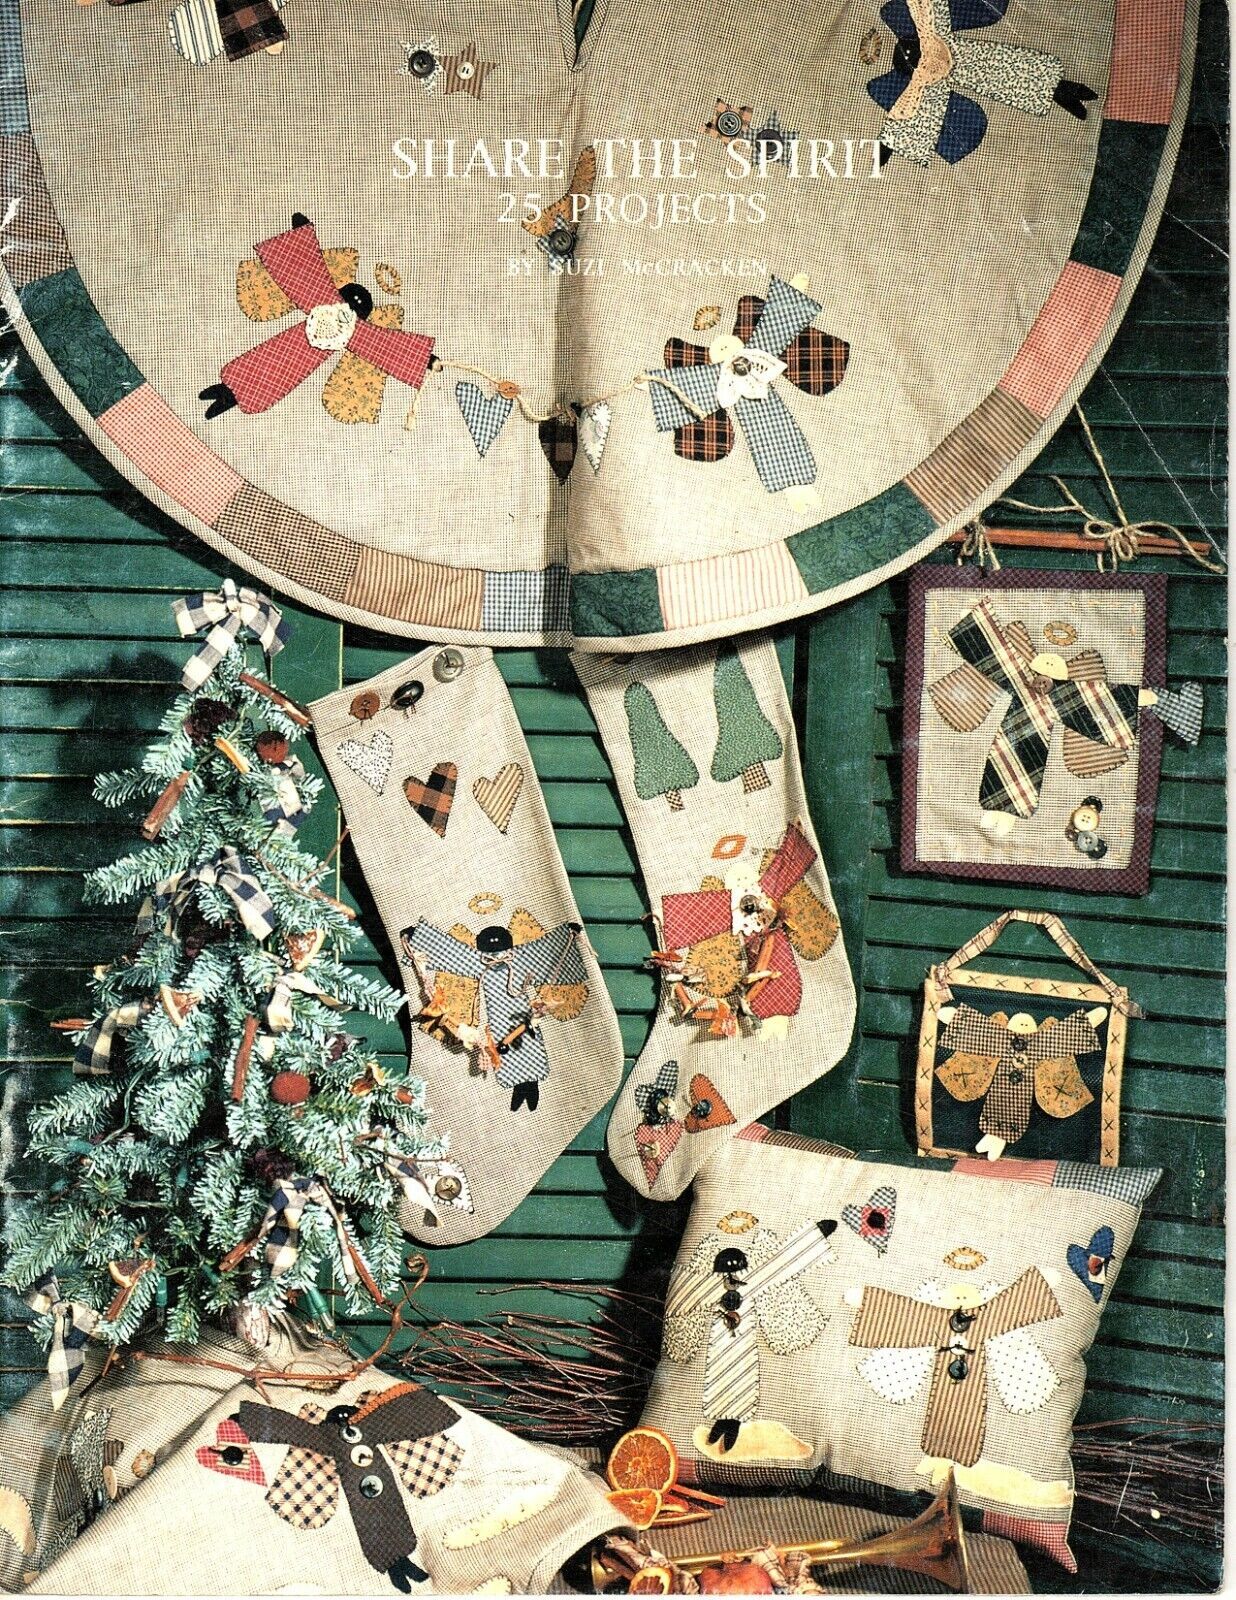 The Buckeye Tree Share the Spirit 25 Quilt Pattern Projects Vintage 1996 - $9.37